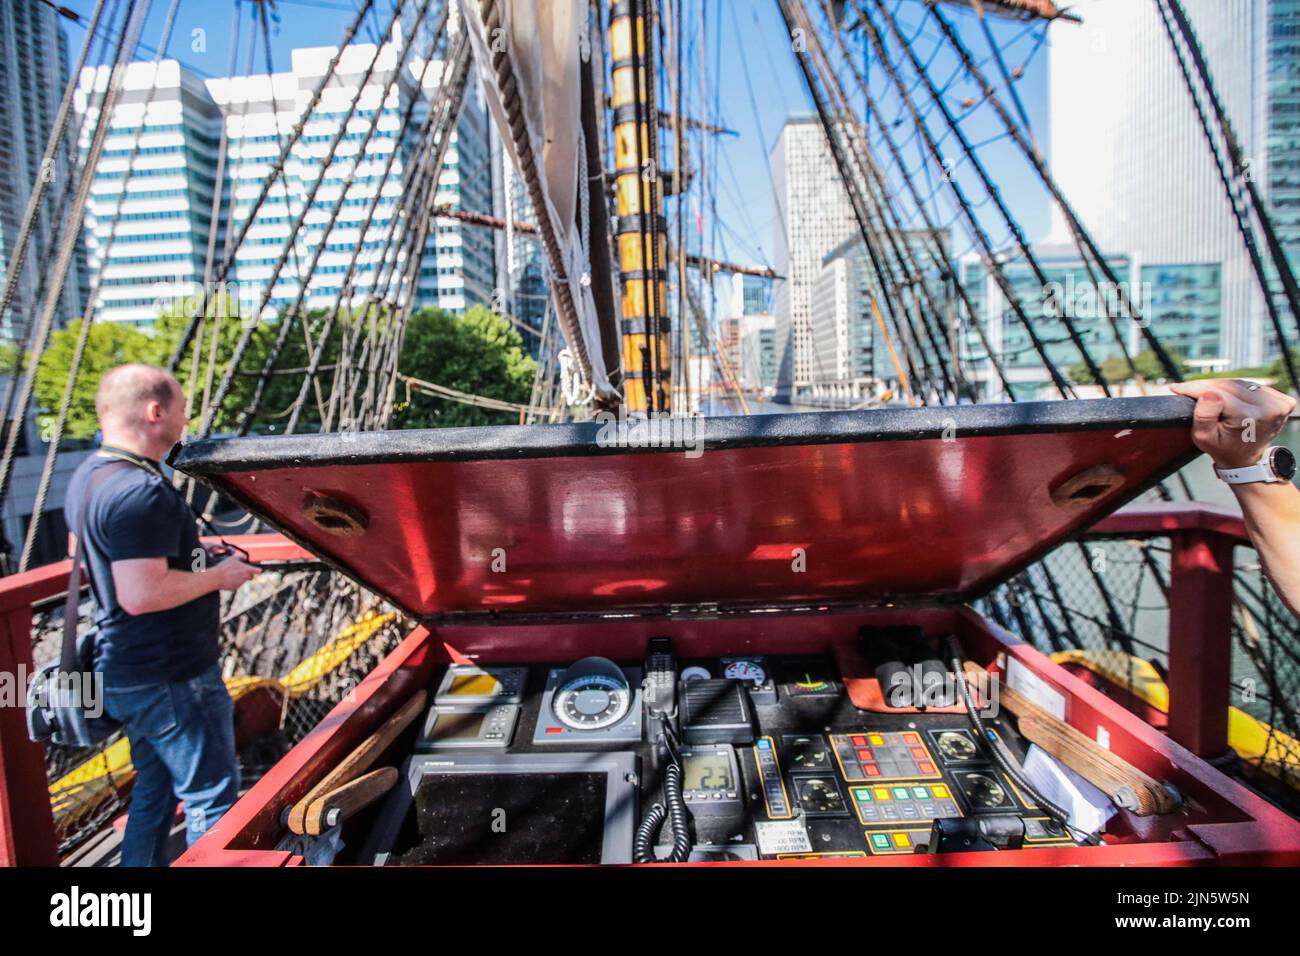 London UK 9 August 2022 The new navigation board  in the Replica 18th century Swedish ship Götheborg docked at South Dock Quay in Canary Wharf. Open to visitors every day until 12 of August  Paul Quezada-Neiman/Alamy Live News Stock Photo